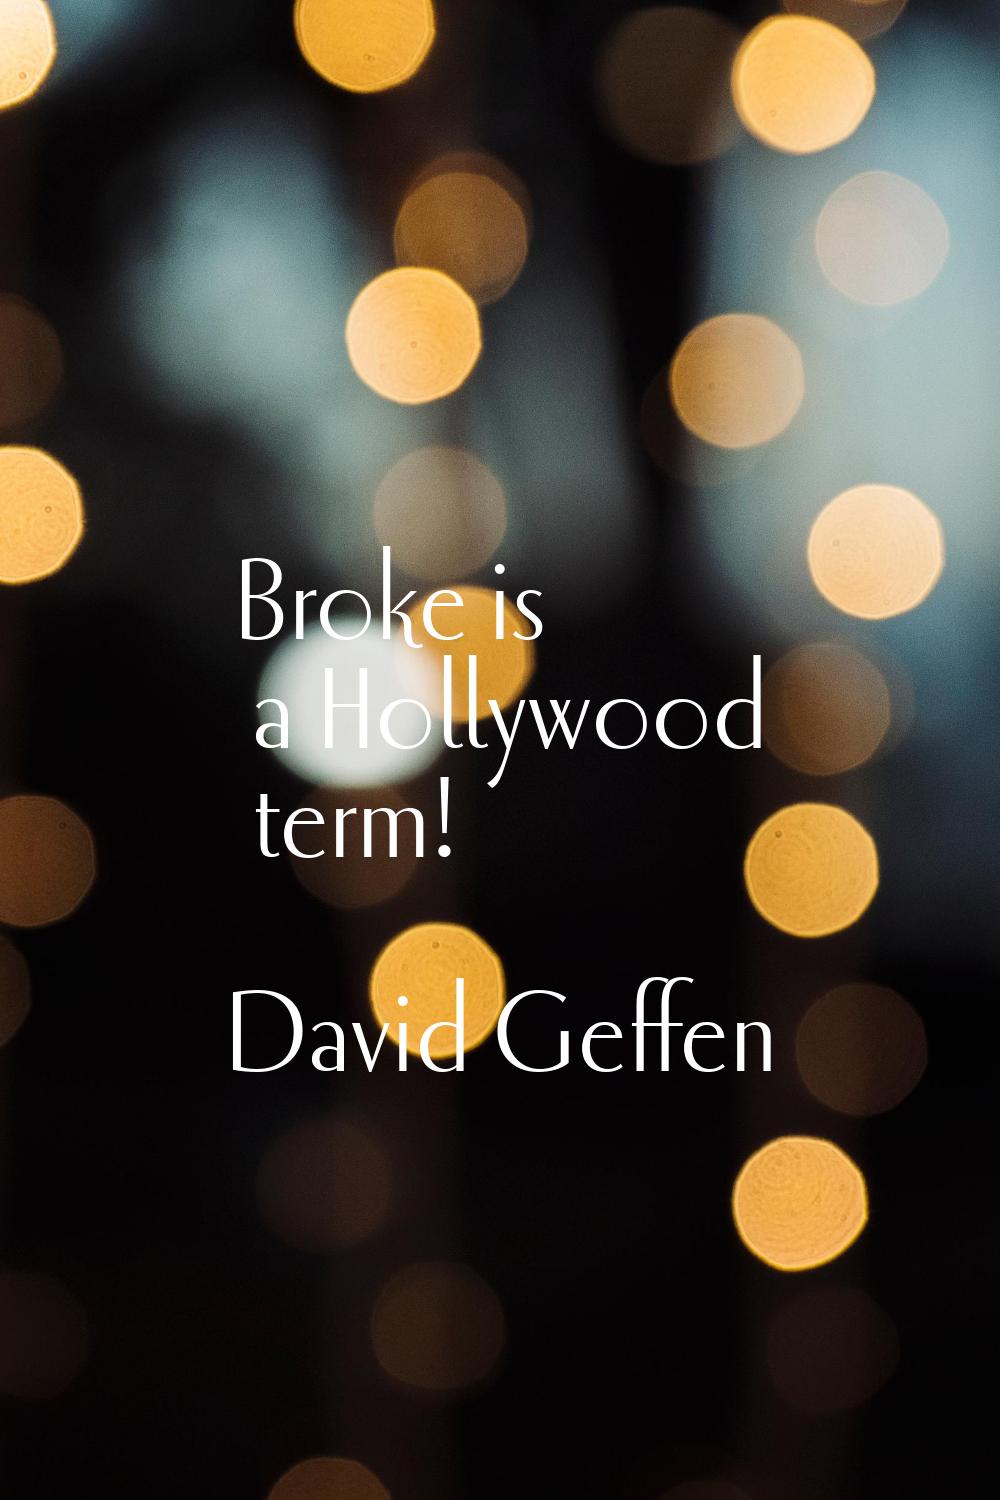 Broke is a Hollywood term!